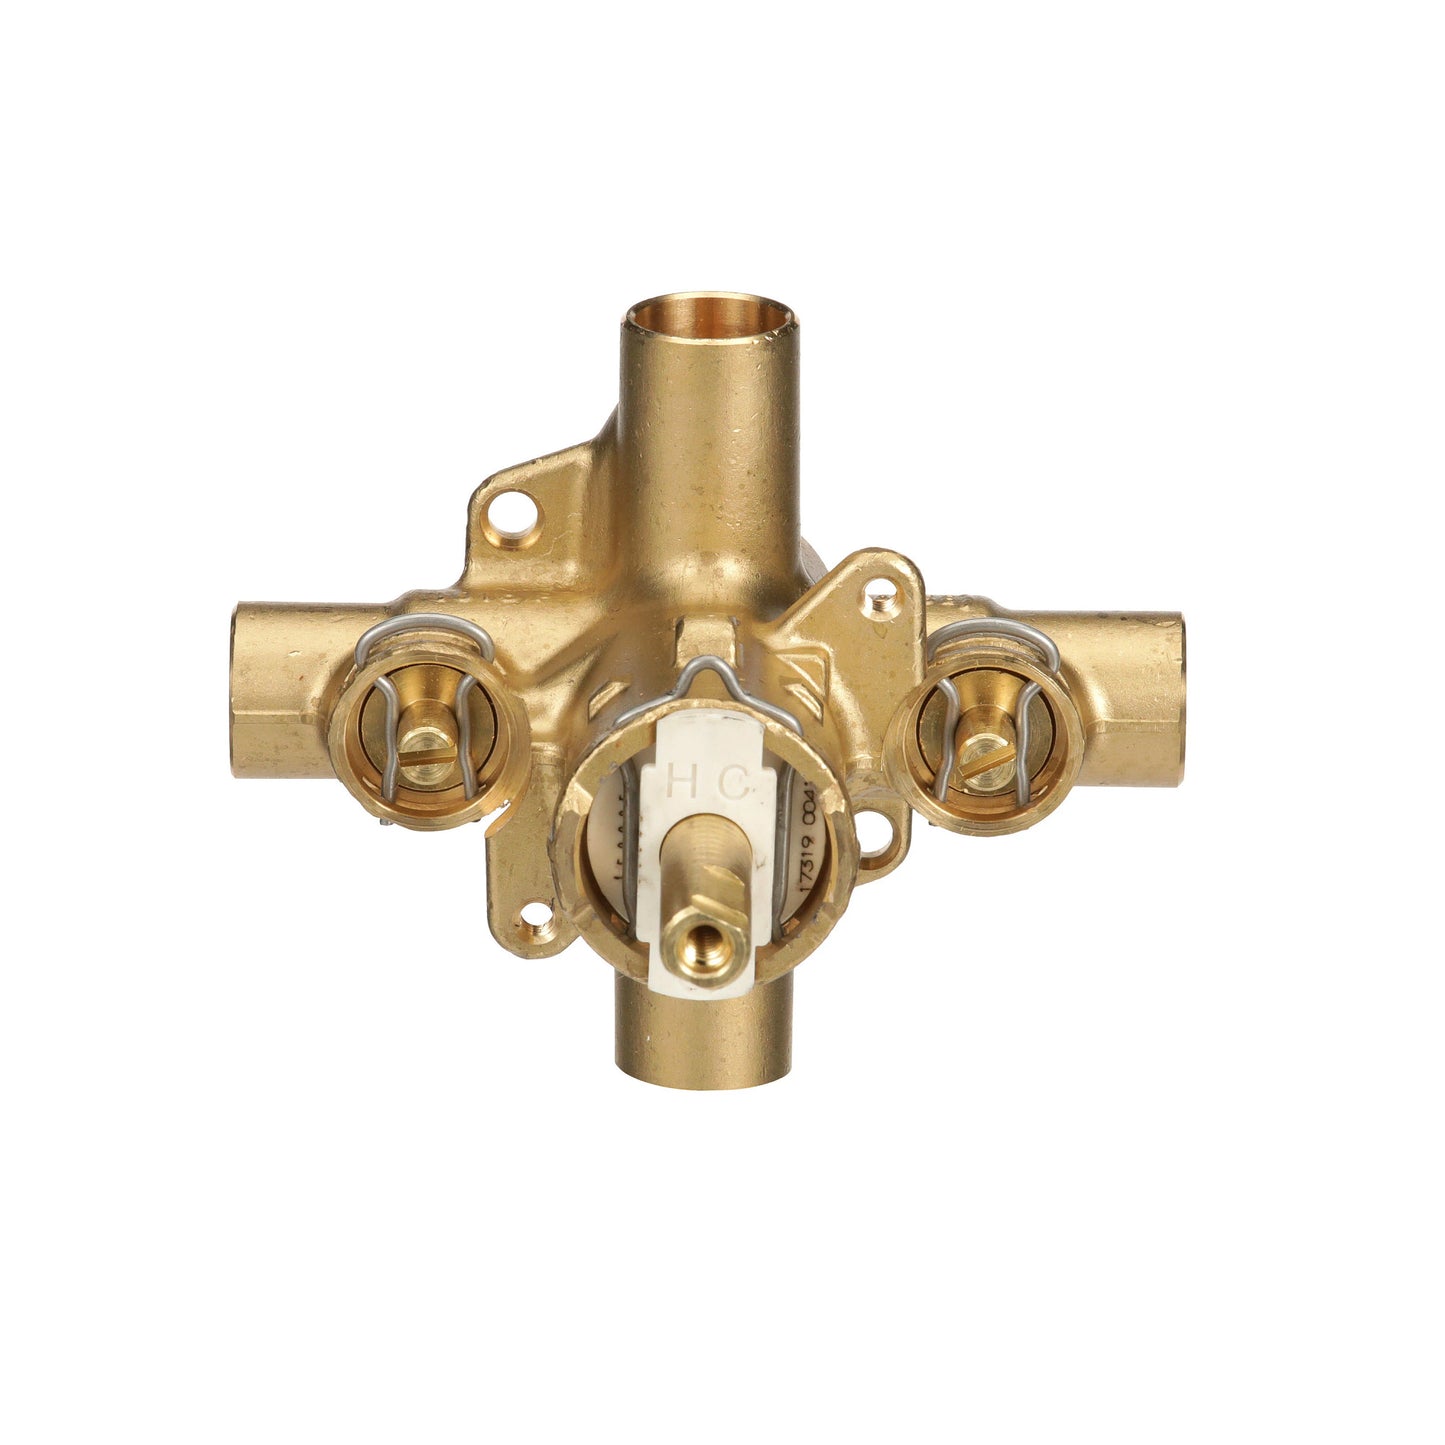 2570 - M-Pact Posi-Temp Pressure Balancing Rough-in Valve with Stops - 1/2" CC with Stops